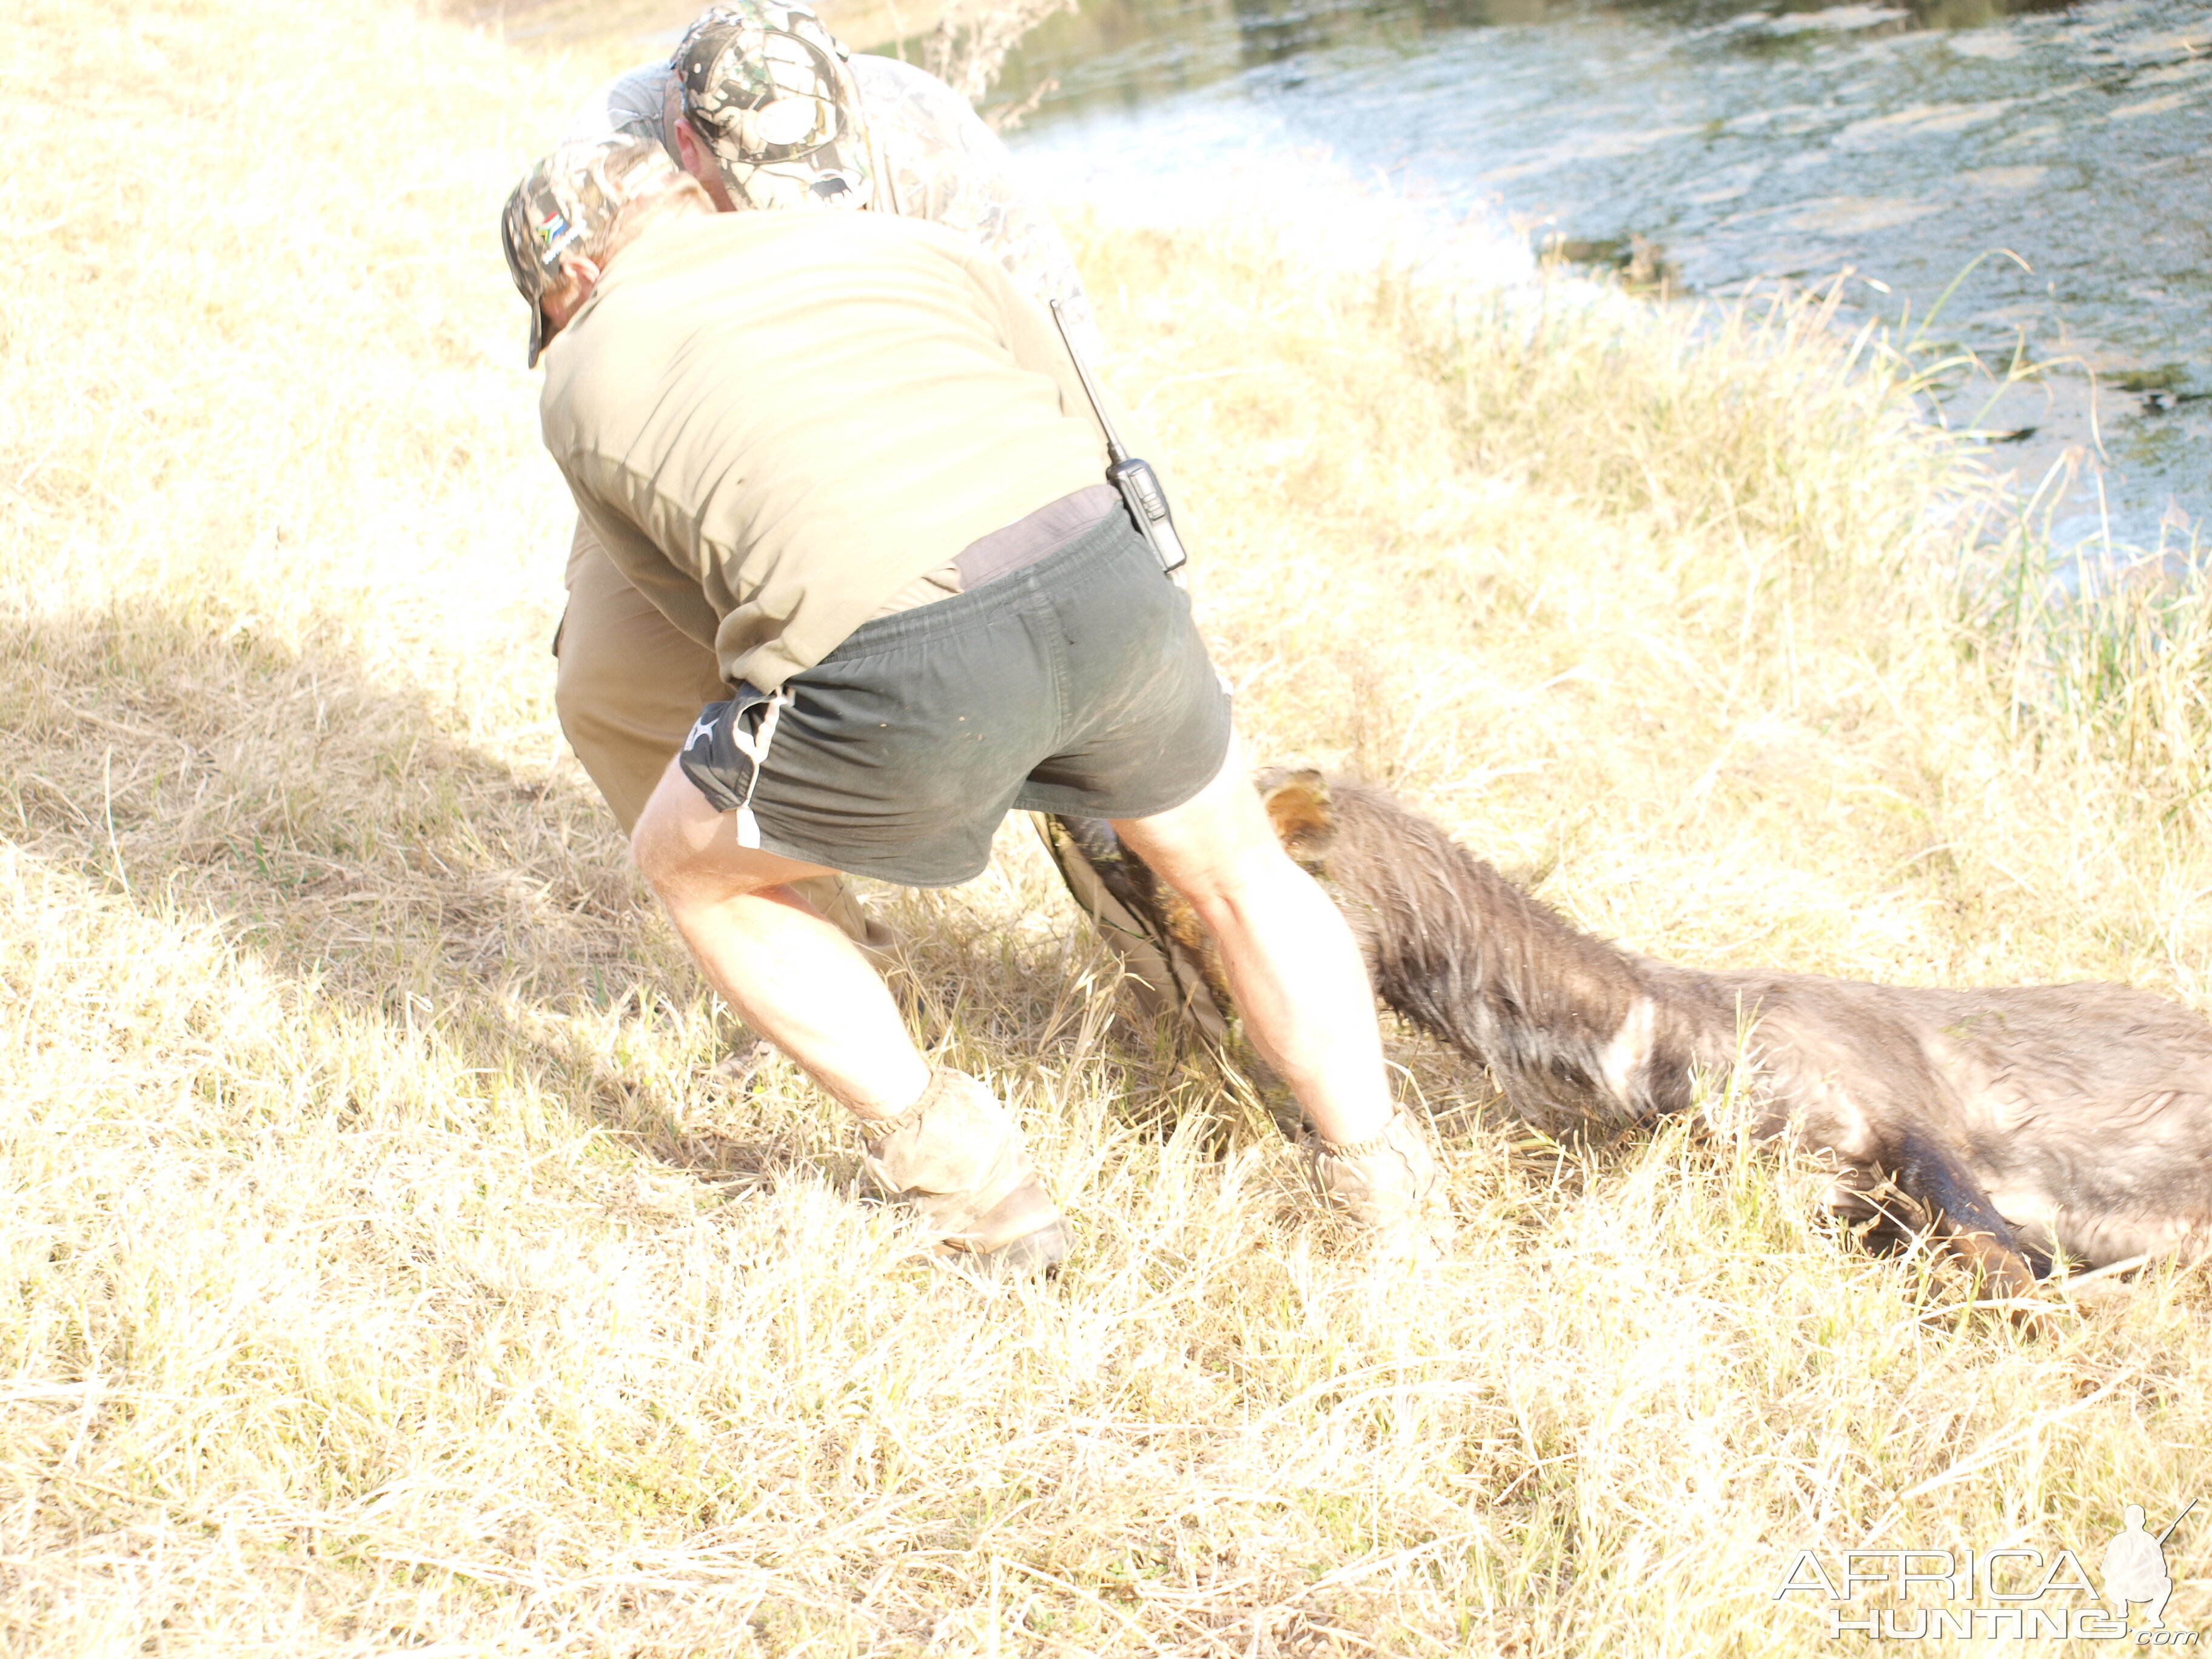 Retrieving Nyala from the water